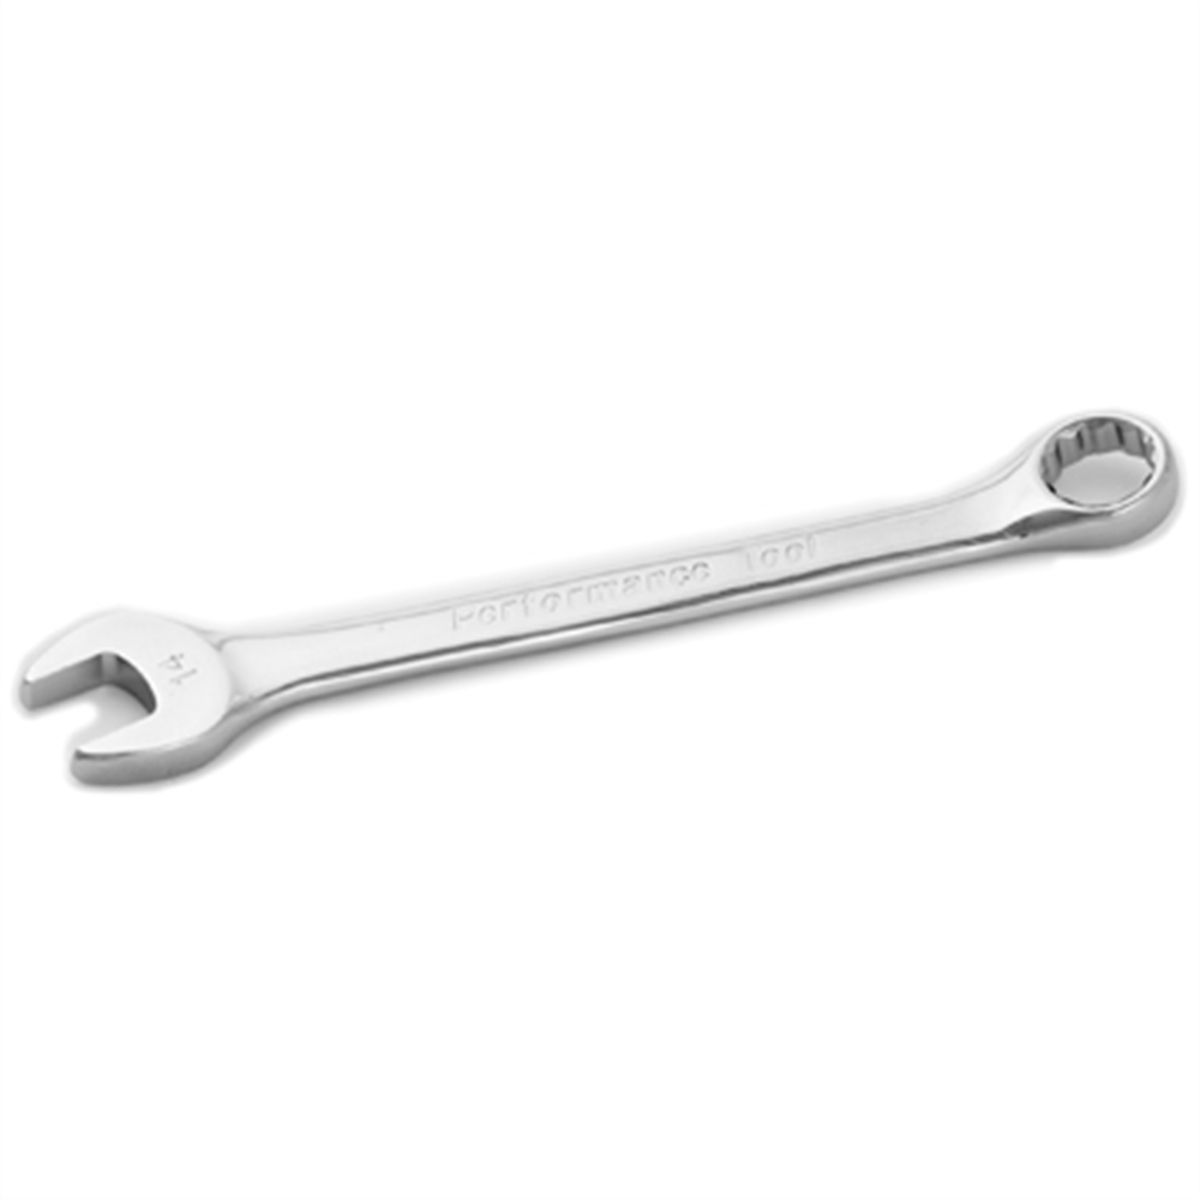 14mm Combination Wrench